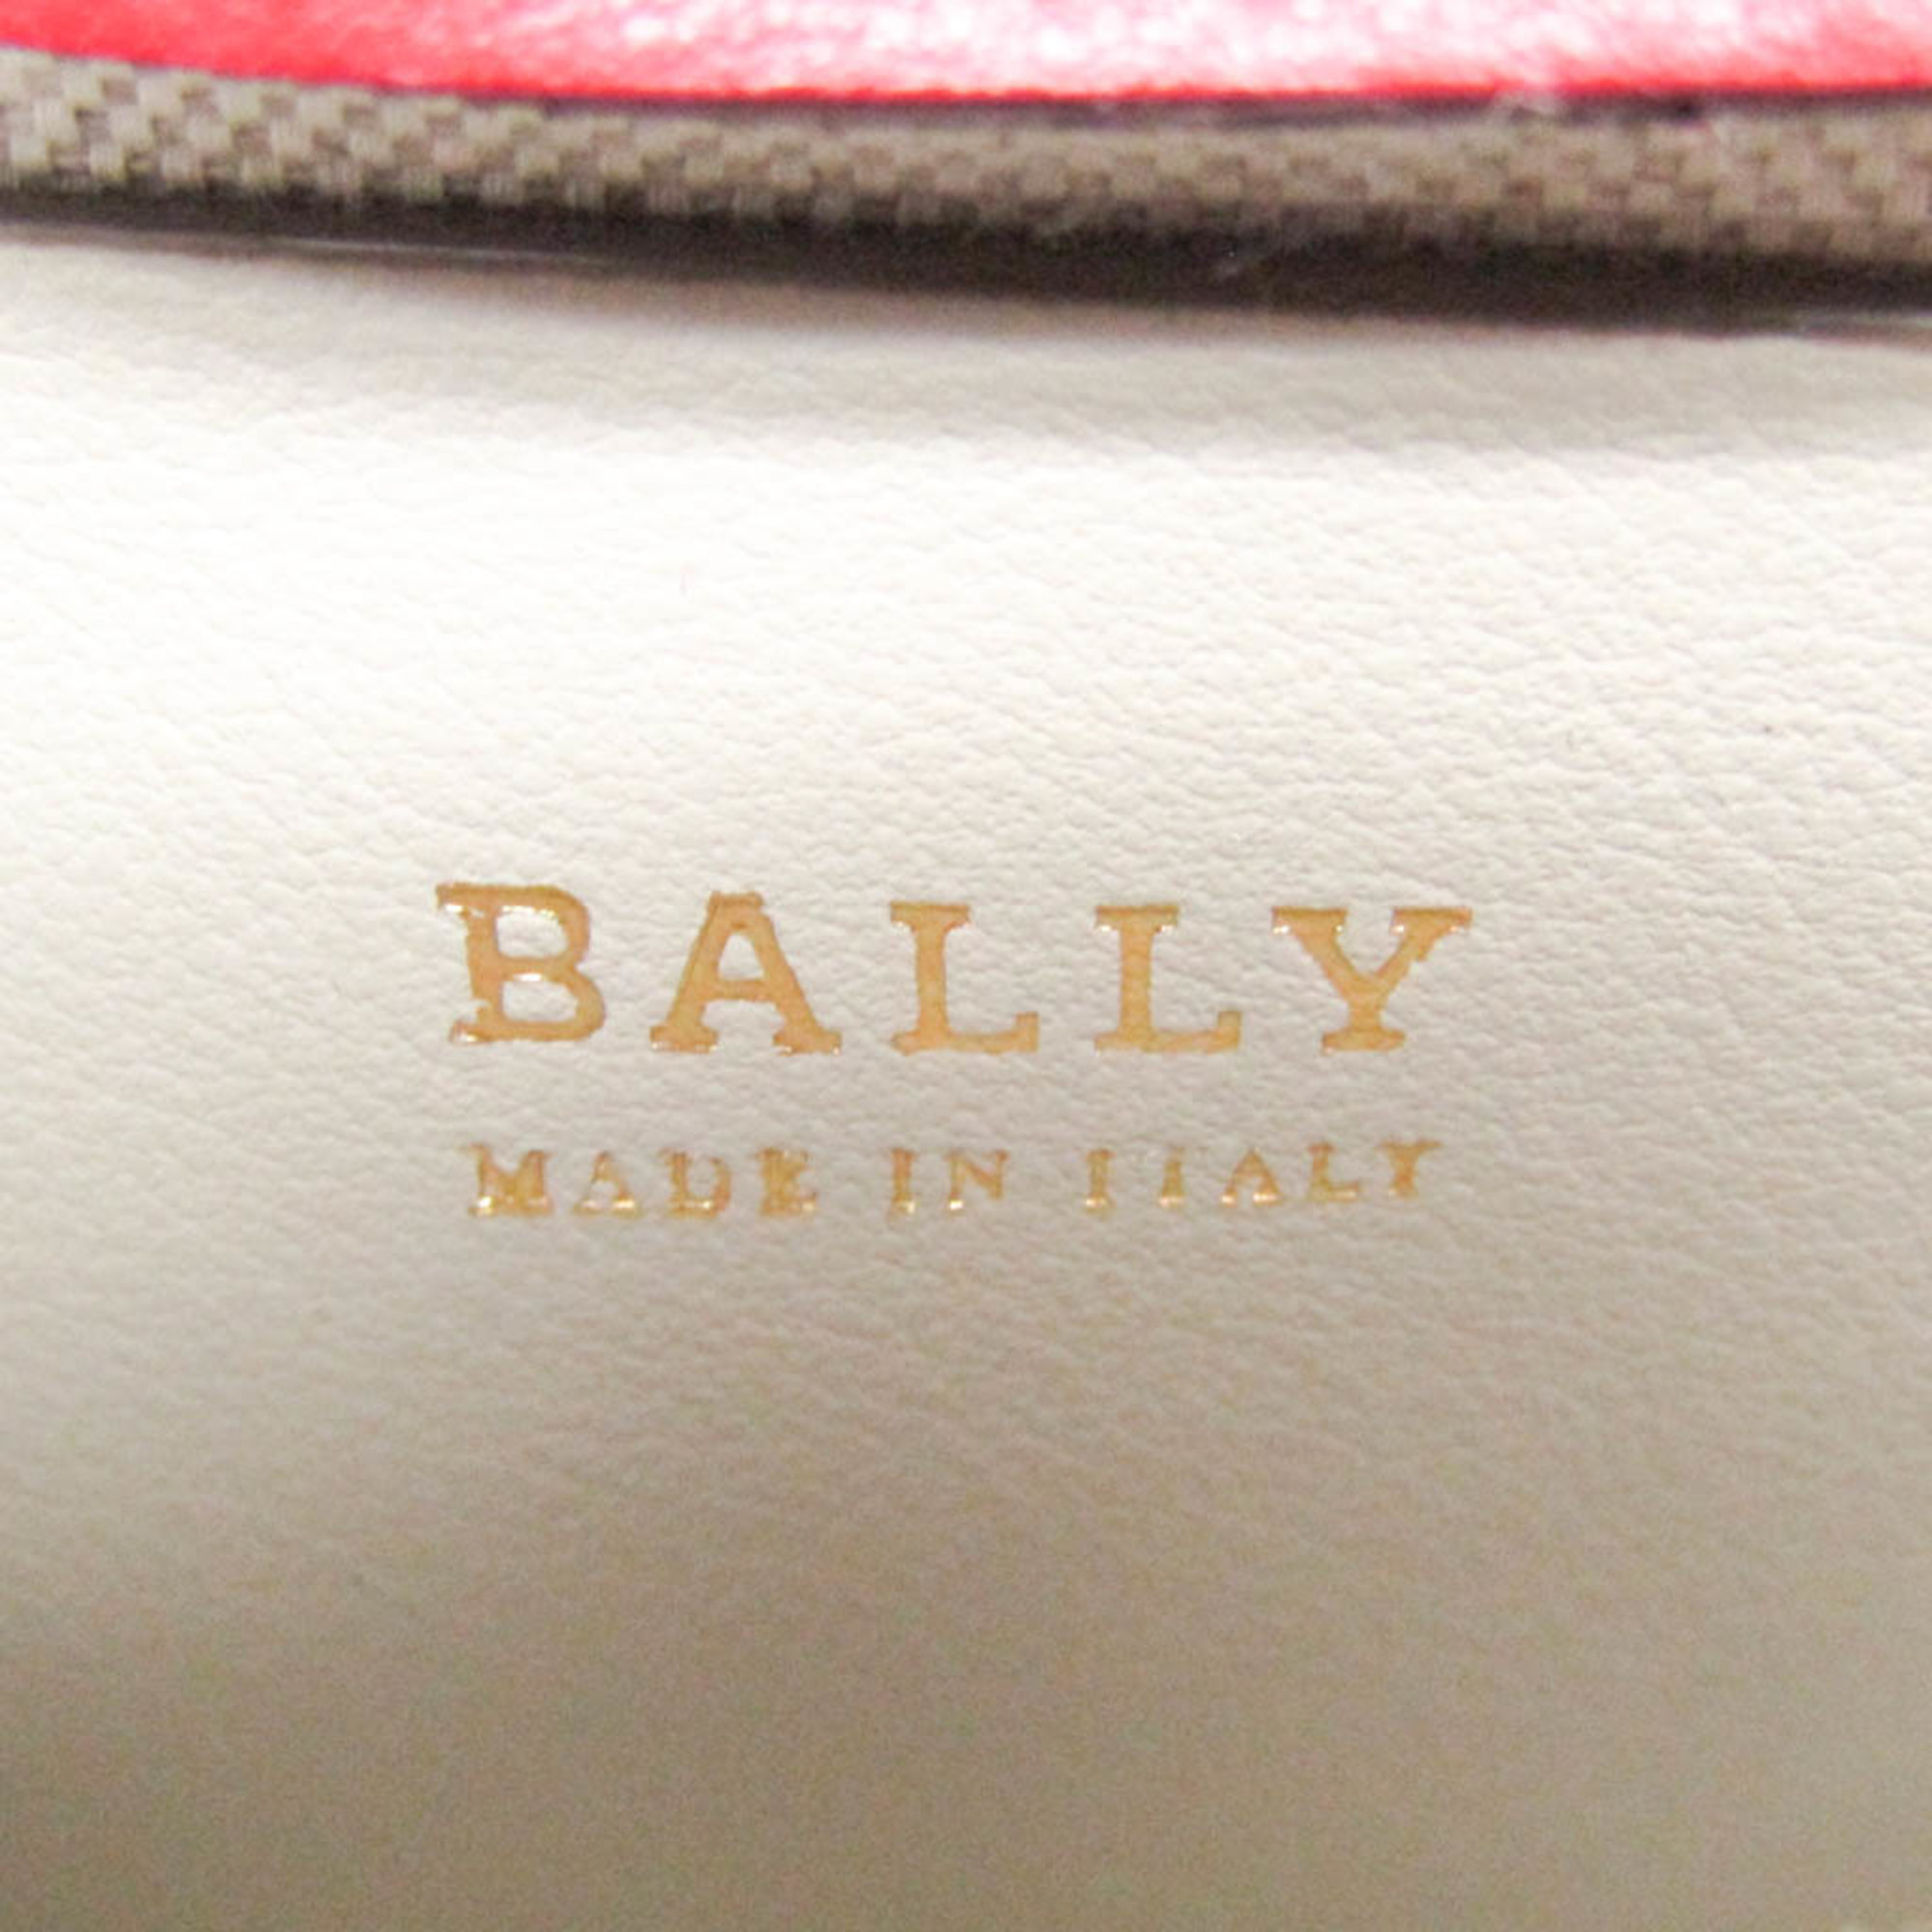 Bally Camy 6235198 Women's Leather Shoulder Bag Red Color